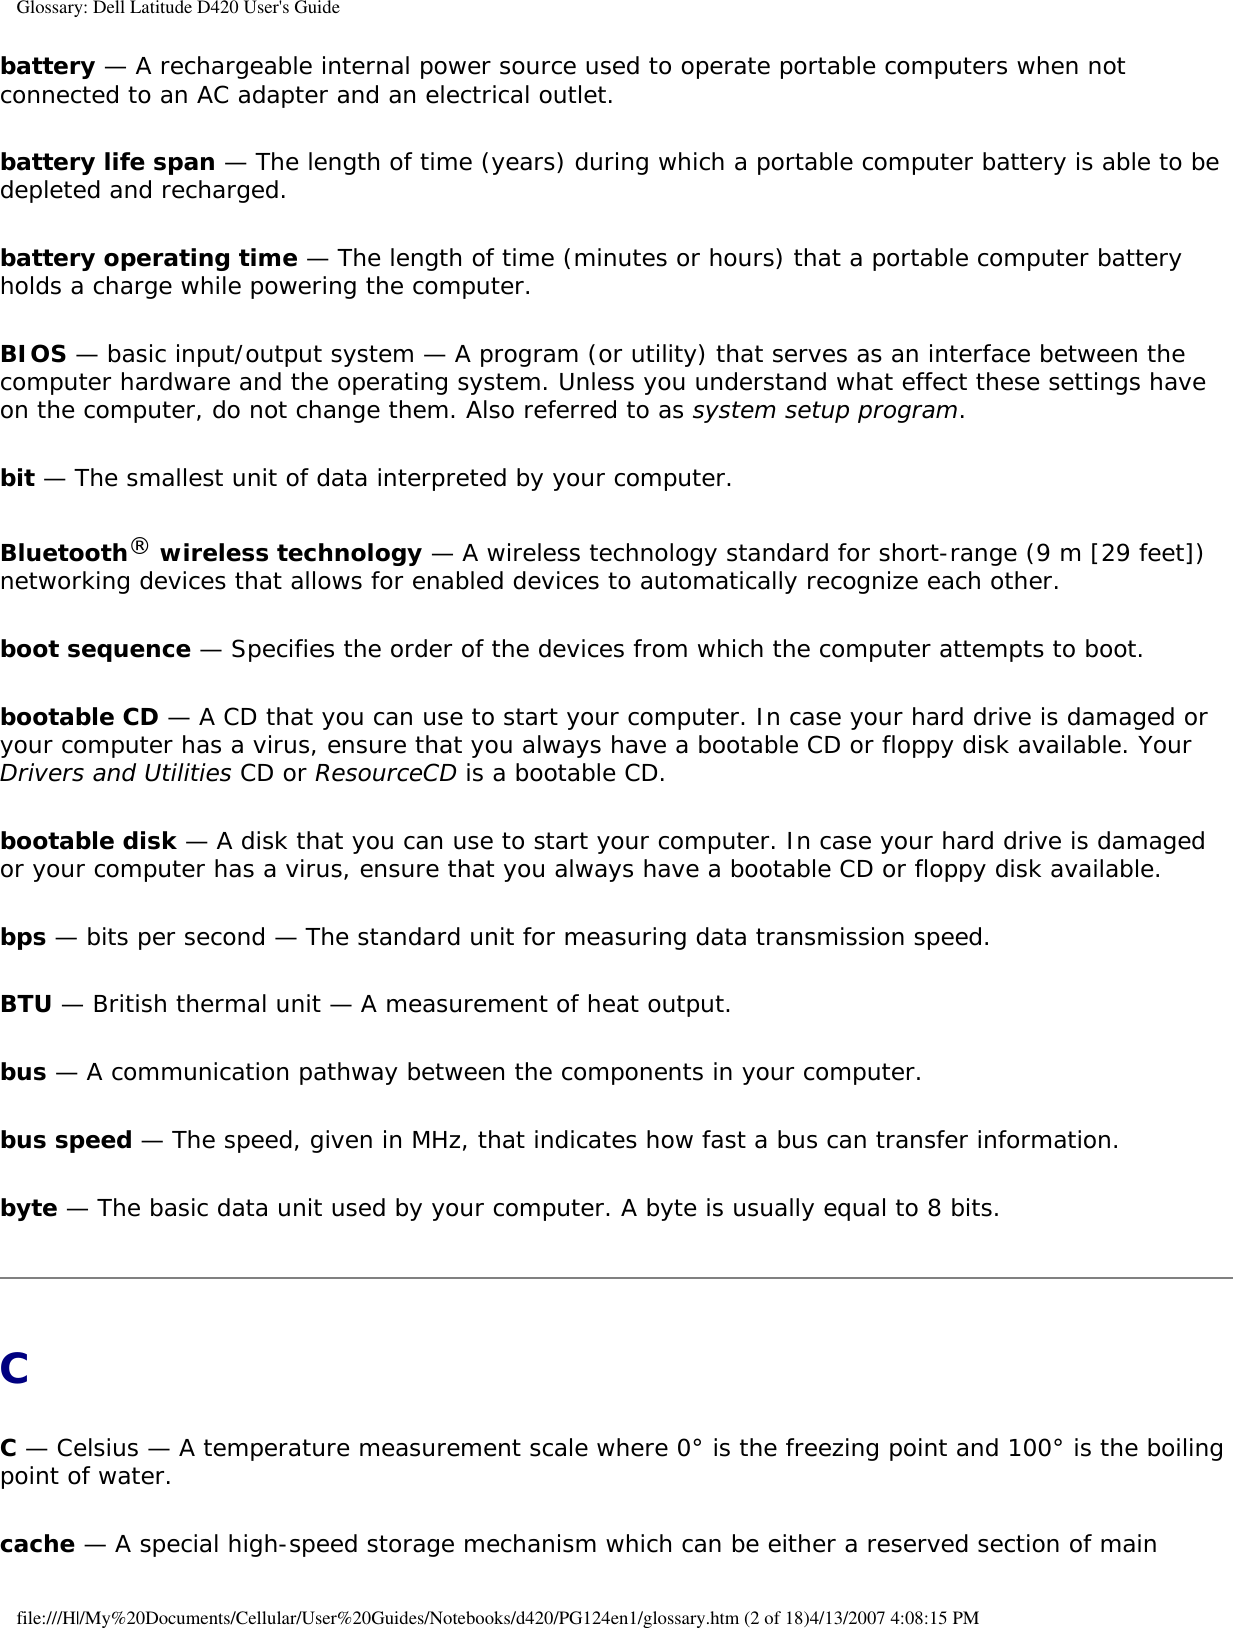 Glossary: Dell Latitude D420 User&apos;s Guidebattery — A rechargeable internal power source used to operate portable computers when not connected to an AC adapter and an electrical outlet.battery life span — The length of time (years) during which a portable computer battery is able to be depleted and recharged.battery operating time — The length of time (minutes or hours) that a portable computer battery holds a charge while powering the computer.BIOS — basic input/output system — A program (or utility) that serves as an interface between the computer hardware and the operating system. Unless you understand what effect these settings have on the computer, do not change them. Also referred to as system setup program.bit — The smallest unit of data interpreted by your computer.Bluetooth® wireless technology — A wireless technology standard for short-range (9 m [29 feet]) networking devices that allows for enabled devices to automatically recognize each other.boot sequence — Specifies the order of the devices from which the computer attempts to boot.bootable CD — A CD that you can use to start your computer. In case your hard drive is damaged or your computer has a virus, ensure that you always have a bootable CD or floppy disk available. Your Drivers and Utilities CD or ResourceCD is a bootable CD.bootable disk — A disk that you can use to start your computer. In case your hard drive is damaged or your computer has a virus, ensure that you always have a bootable CD or floppy disk available.bps — bits per second — The standard unit for measuring data transmission speed.BTU — British thermal unit — A measurement of heat output.bus — A communication pathway between the components in your computer.bus speed — The speed, given in MHz, that indicates how fast a bus can transfer information.byte — The basic data unit used by your computer. A byte is usually equal to 8 bits.CC — Celsius — A temperature measurement scale where 0° is the freezing point and 100° is the boiling point of water.cache — A special high-speed storage mechanism which can be either a reserved section of main file:///H|/My%20Documents/Cellular/User%20Guides/Notebooks/d420/PG124en1/glossary.htm (2 of 18)4/13/2007 4:08:15 PM